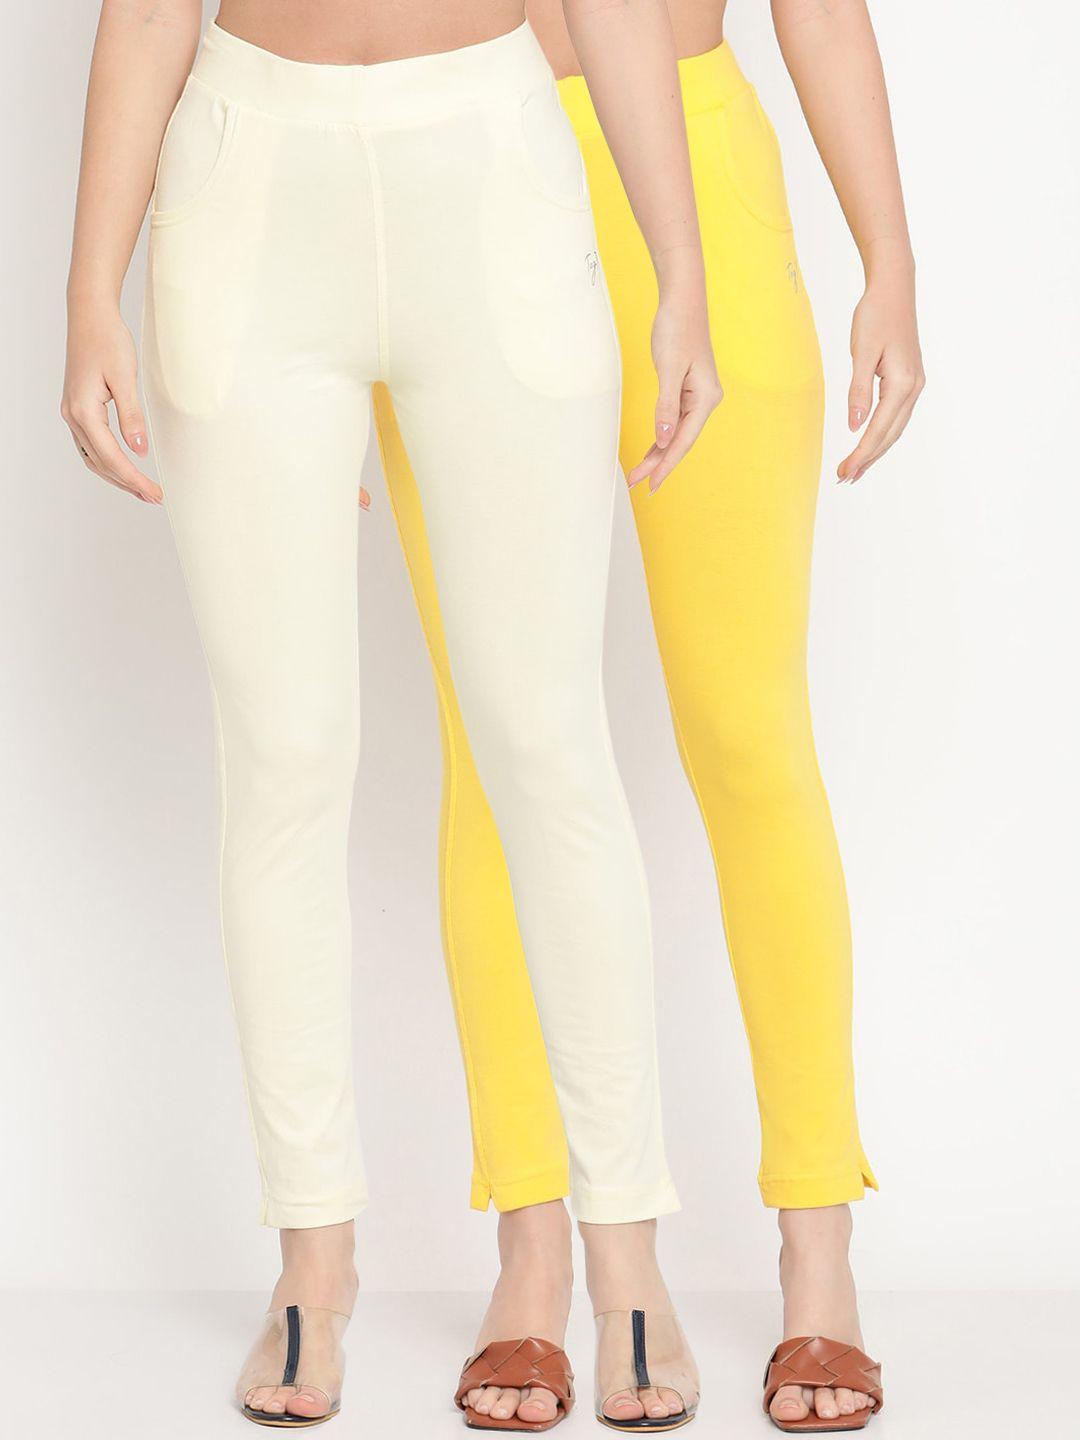 tag 7 women solid cream & yellow ankle length leggings set of 2